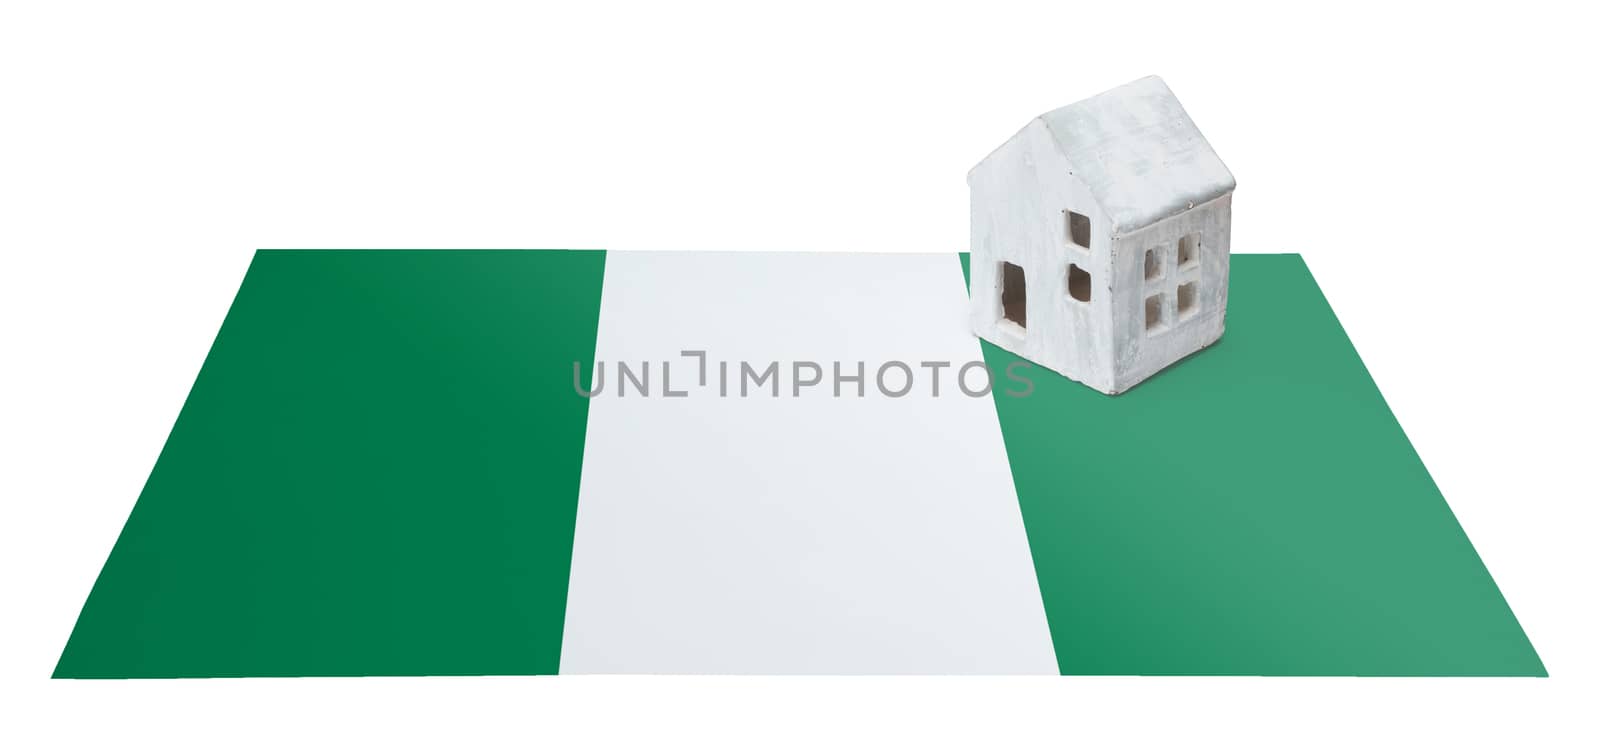 Small house on a flag - Nigeria by michaklootwijk